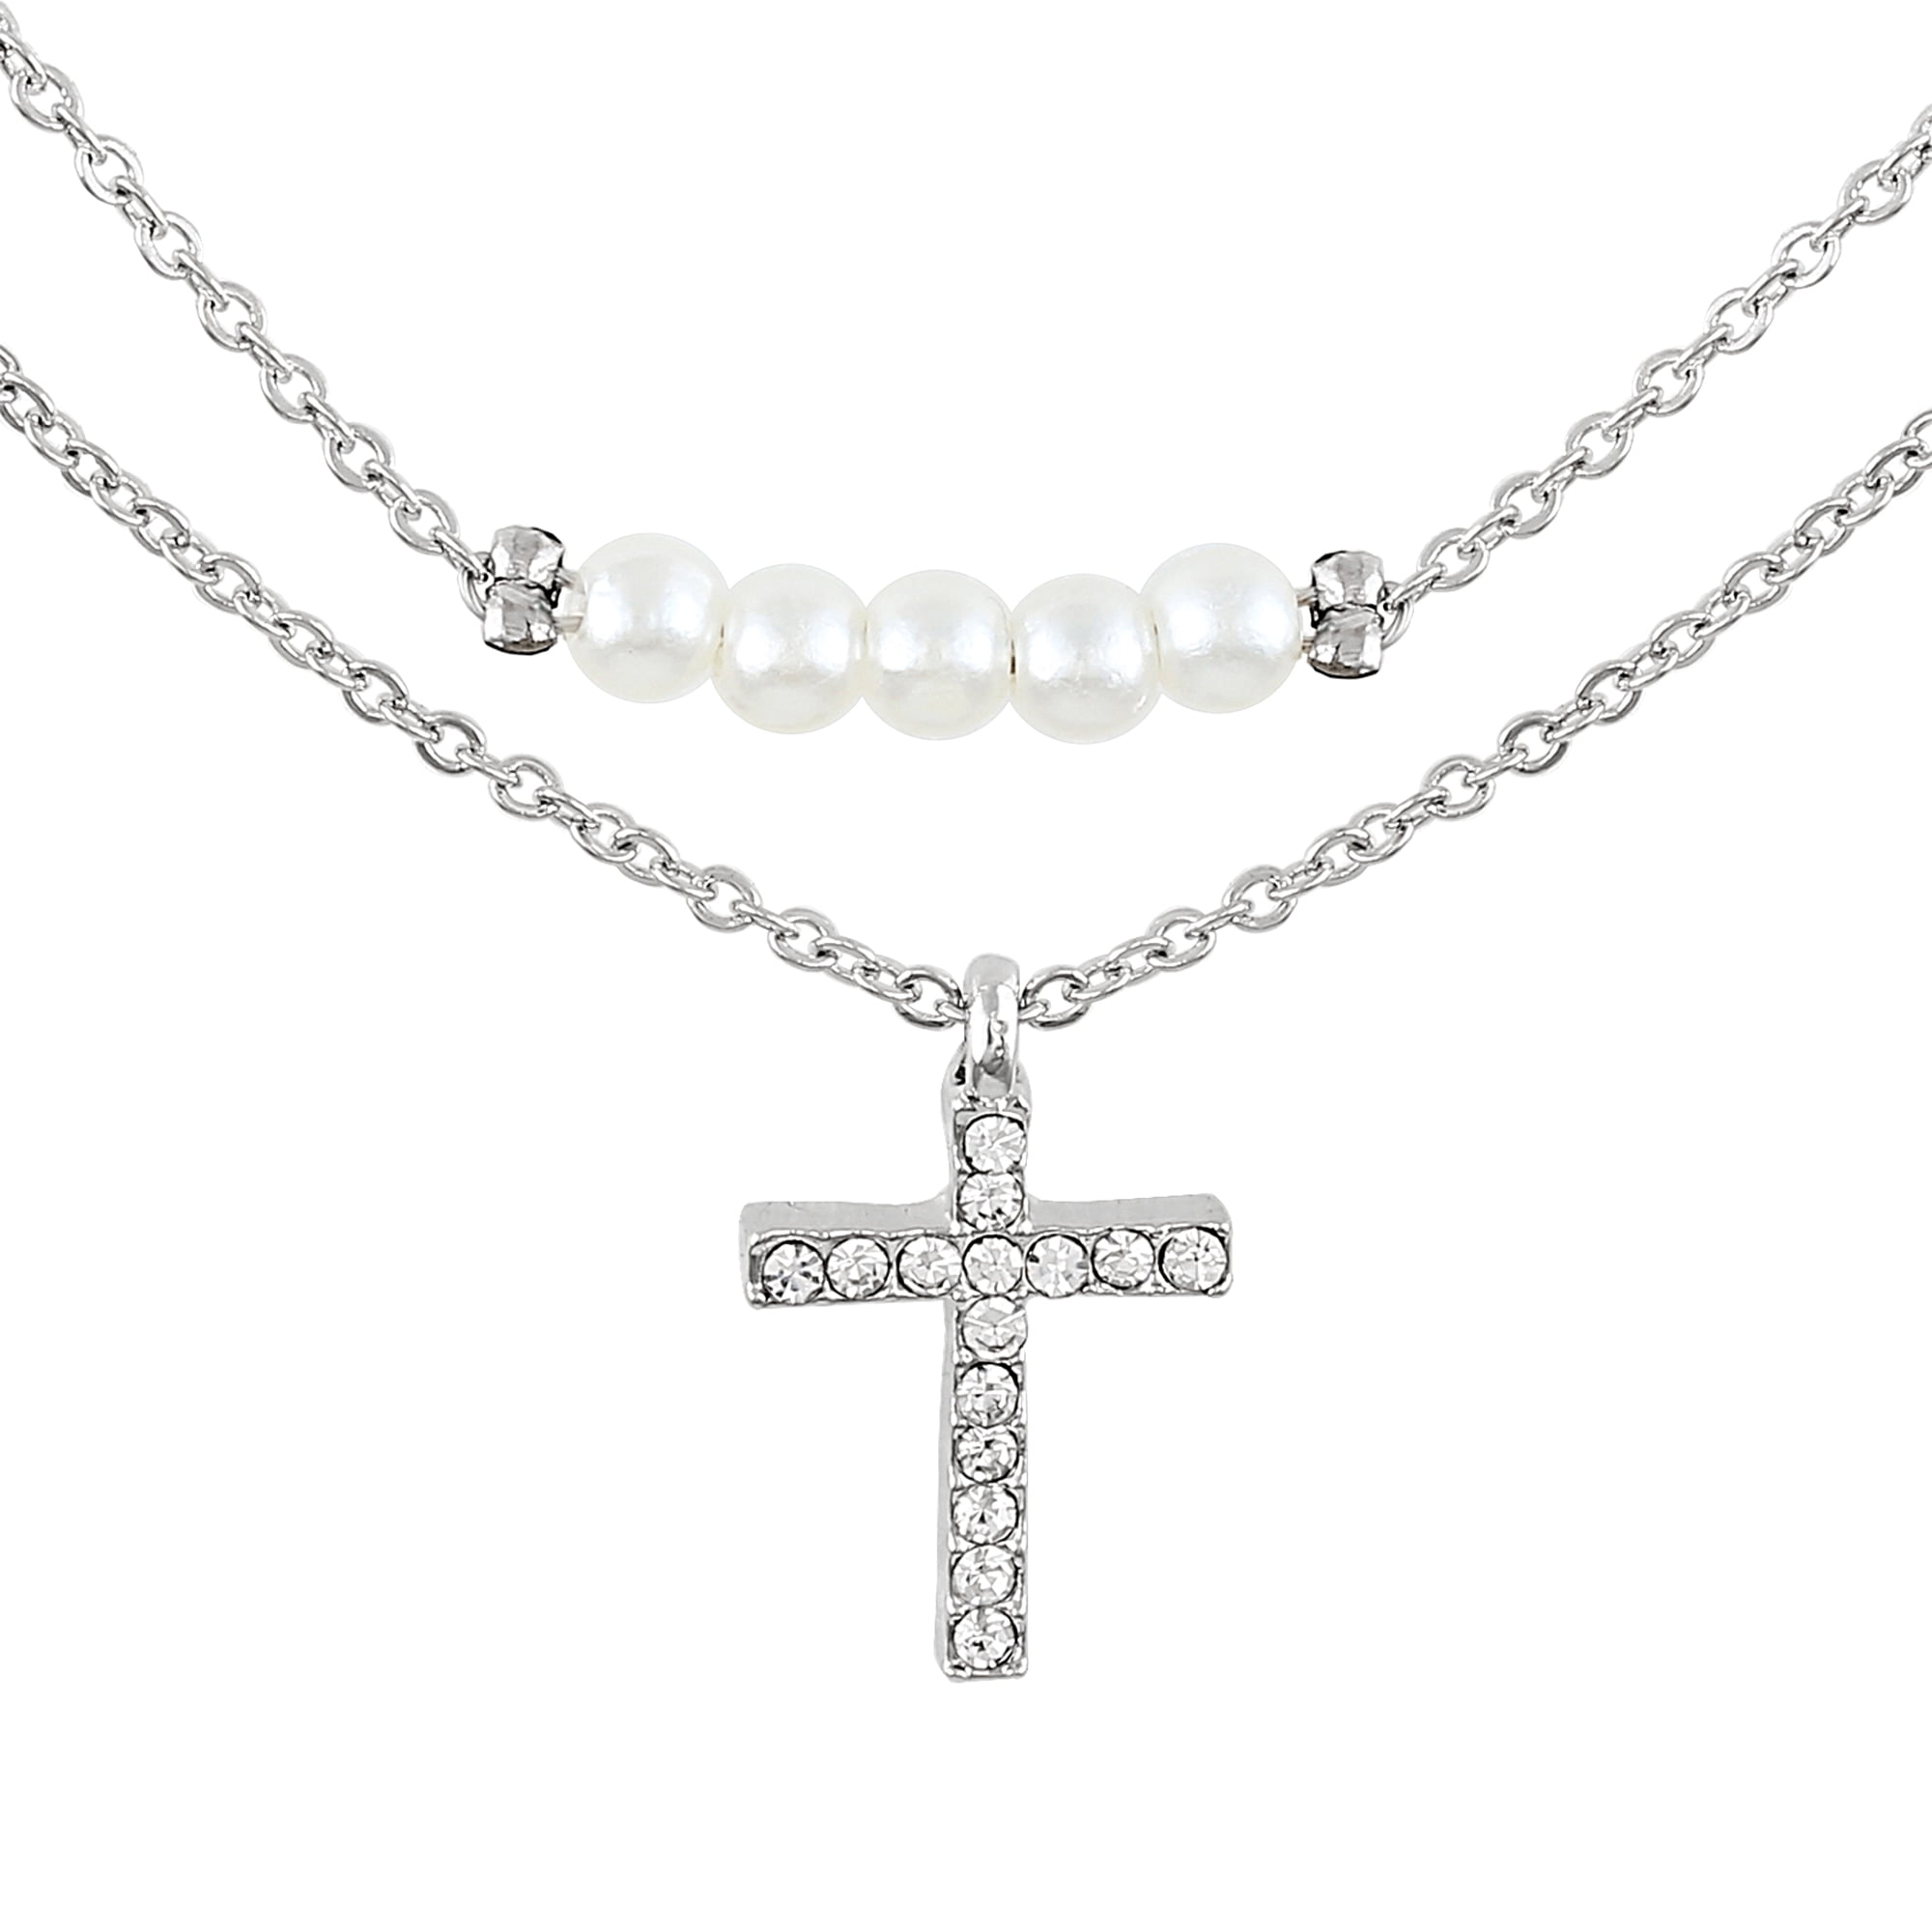 Time and Tru Women's Cross and Pearl Layered Necklace Set. 16" and 18" Imitation Rhodium Chain.